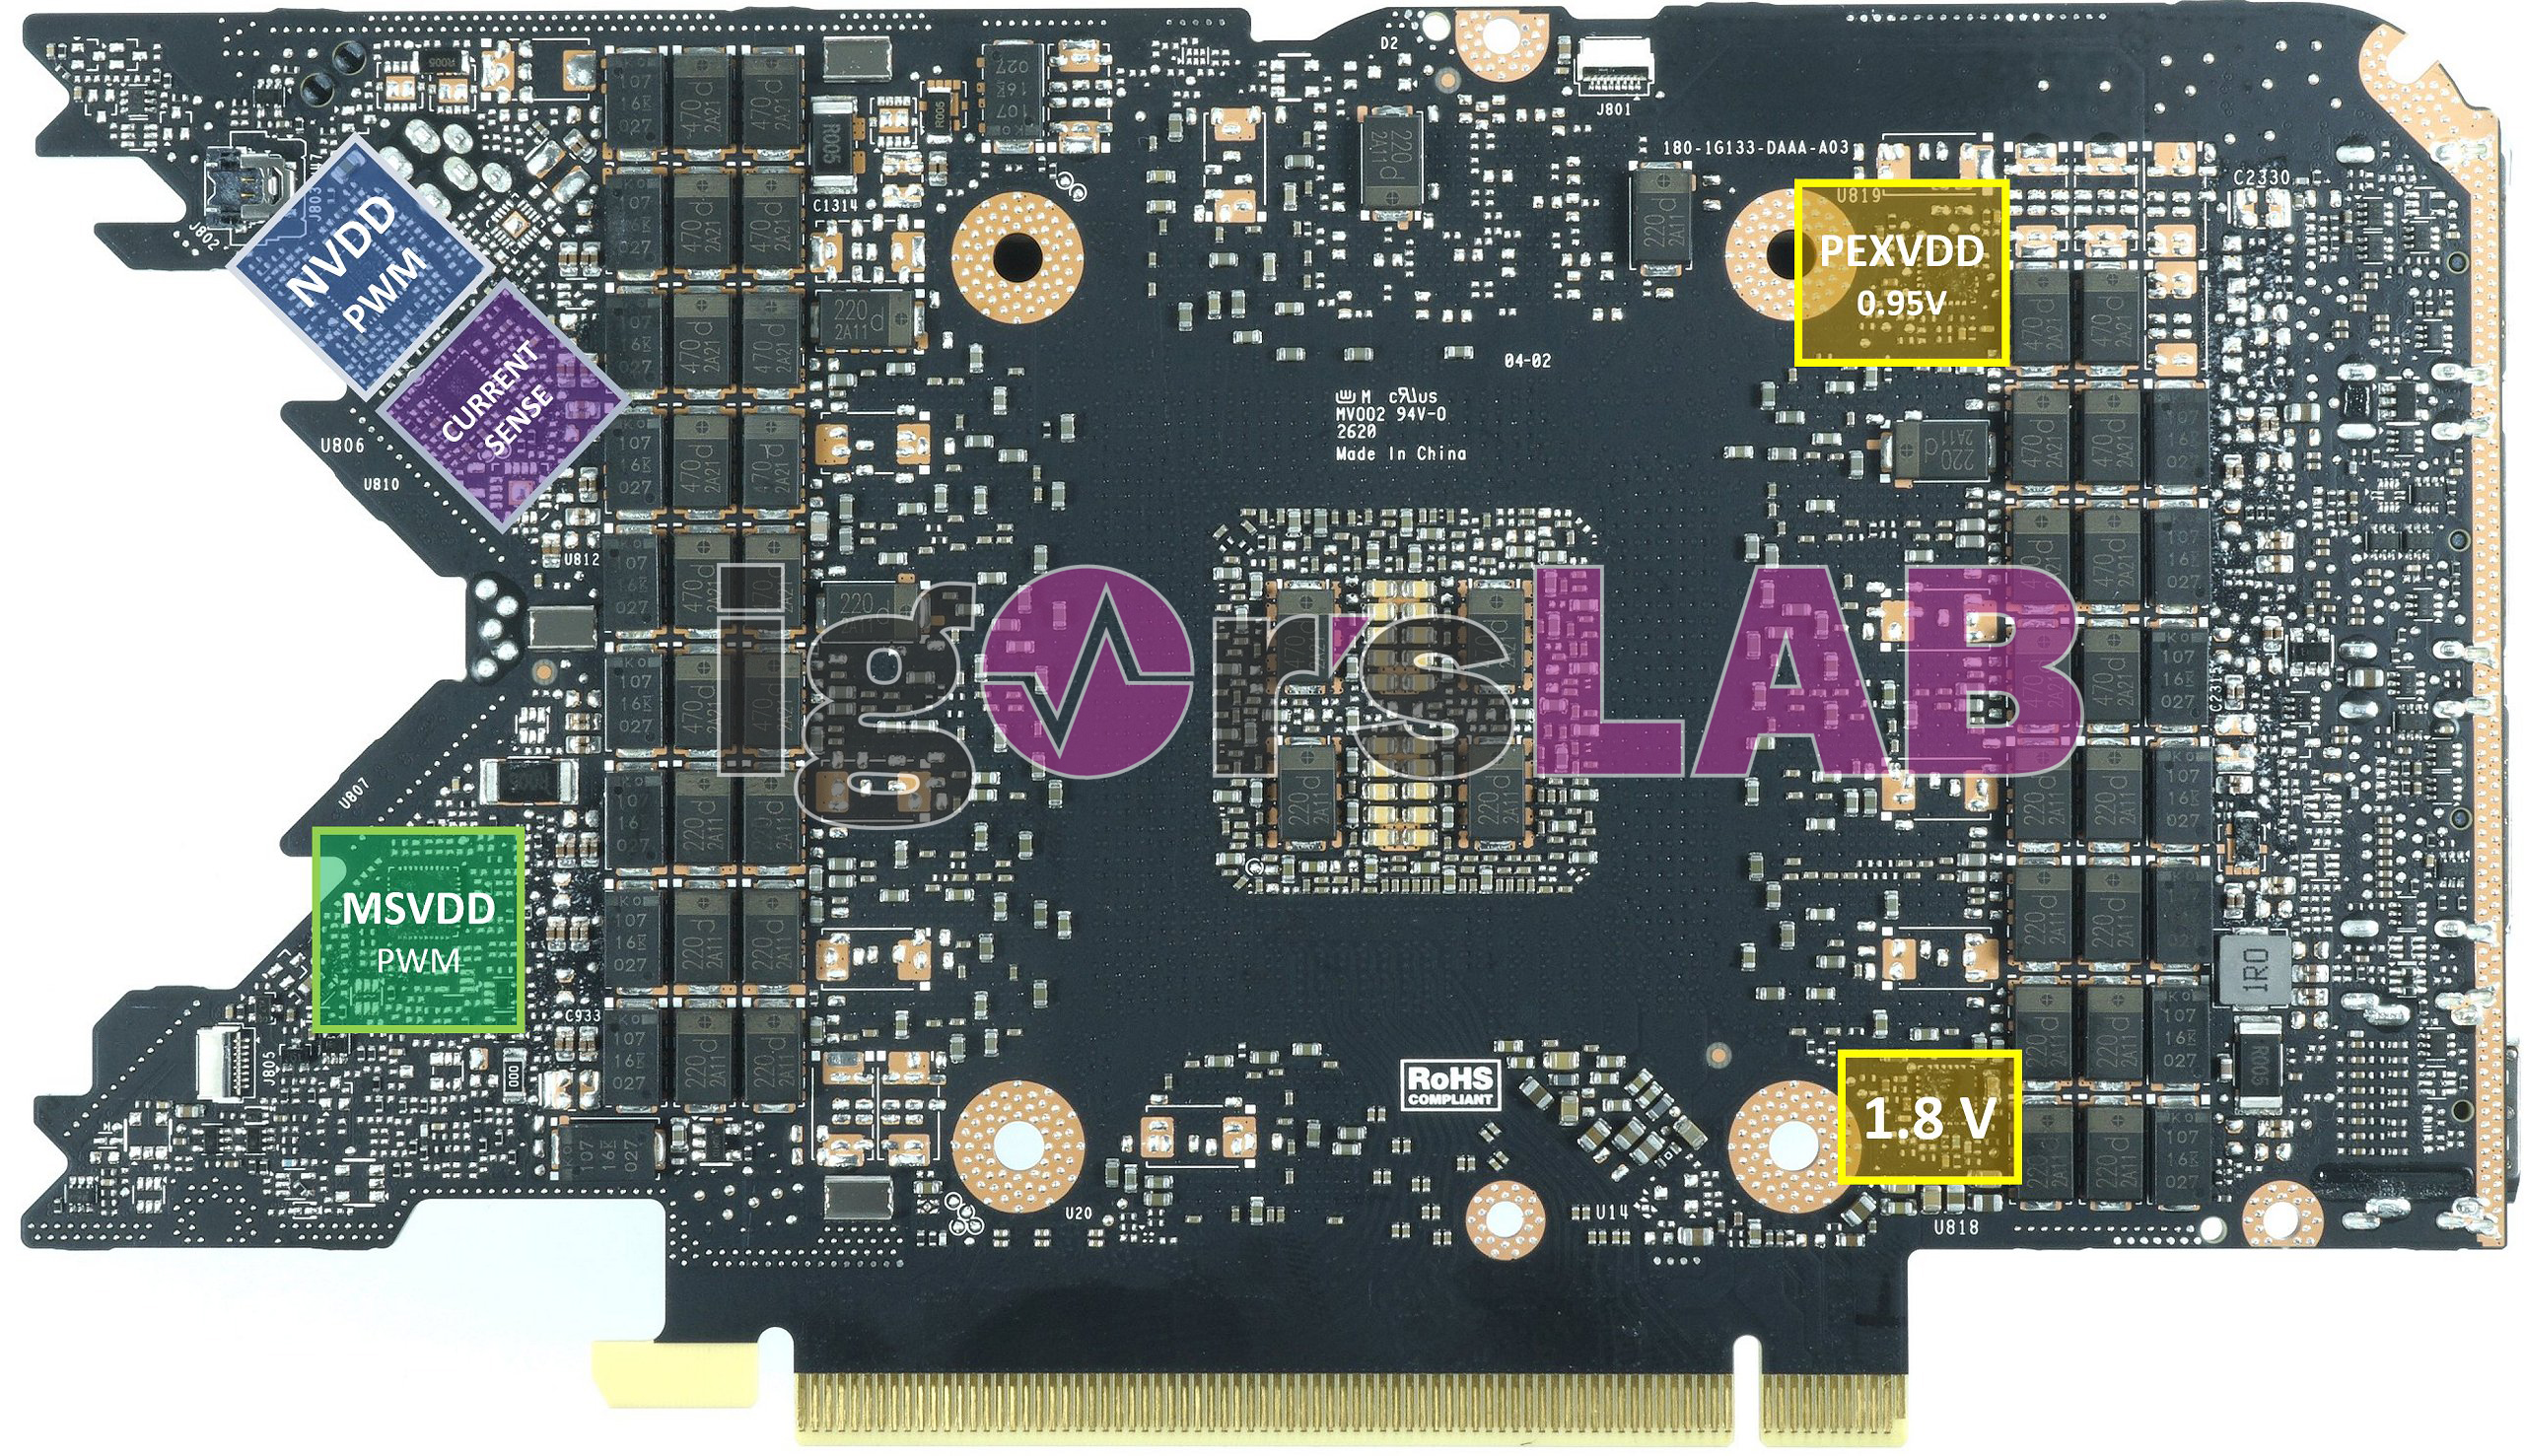 igorslab] Not all Chips are equal – First information about the possible  binning and the quality scattering of the GeForce RTX 3080 and RTX 3090